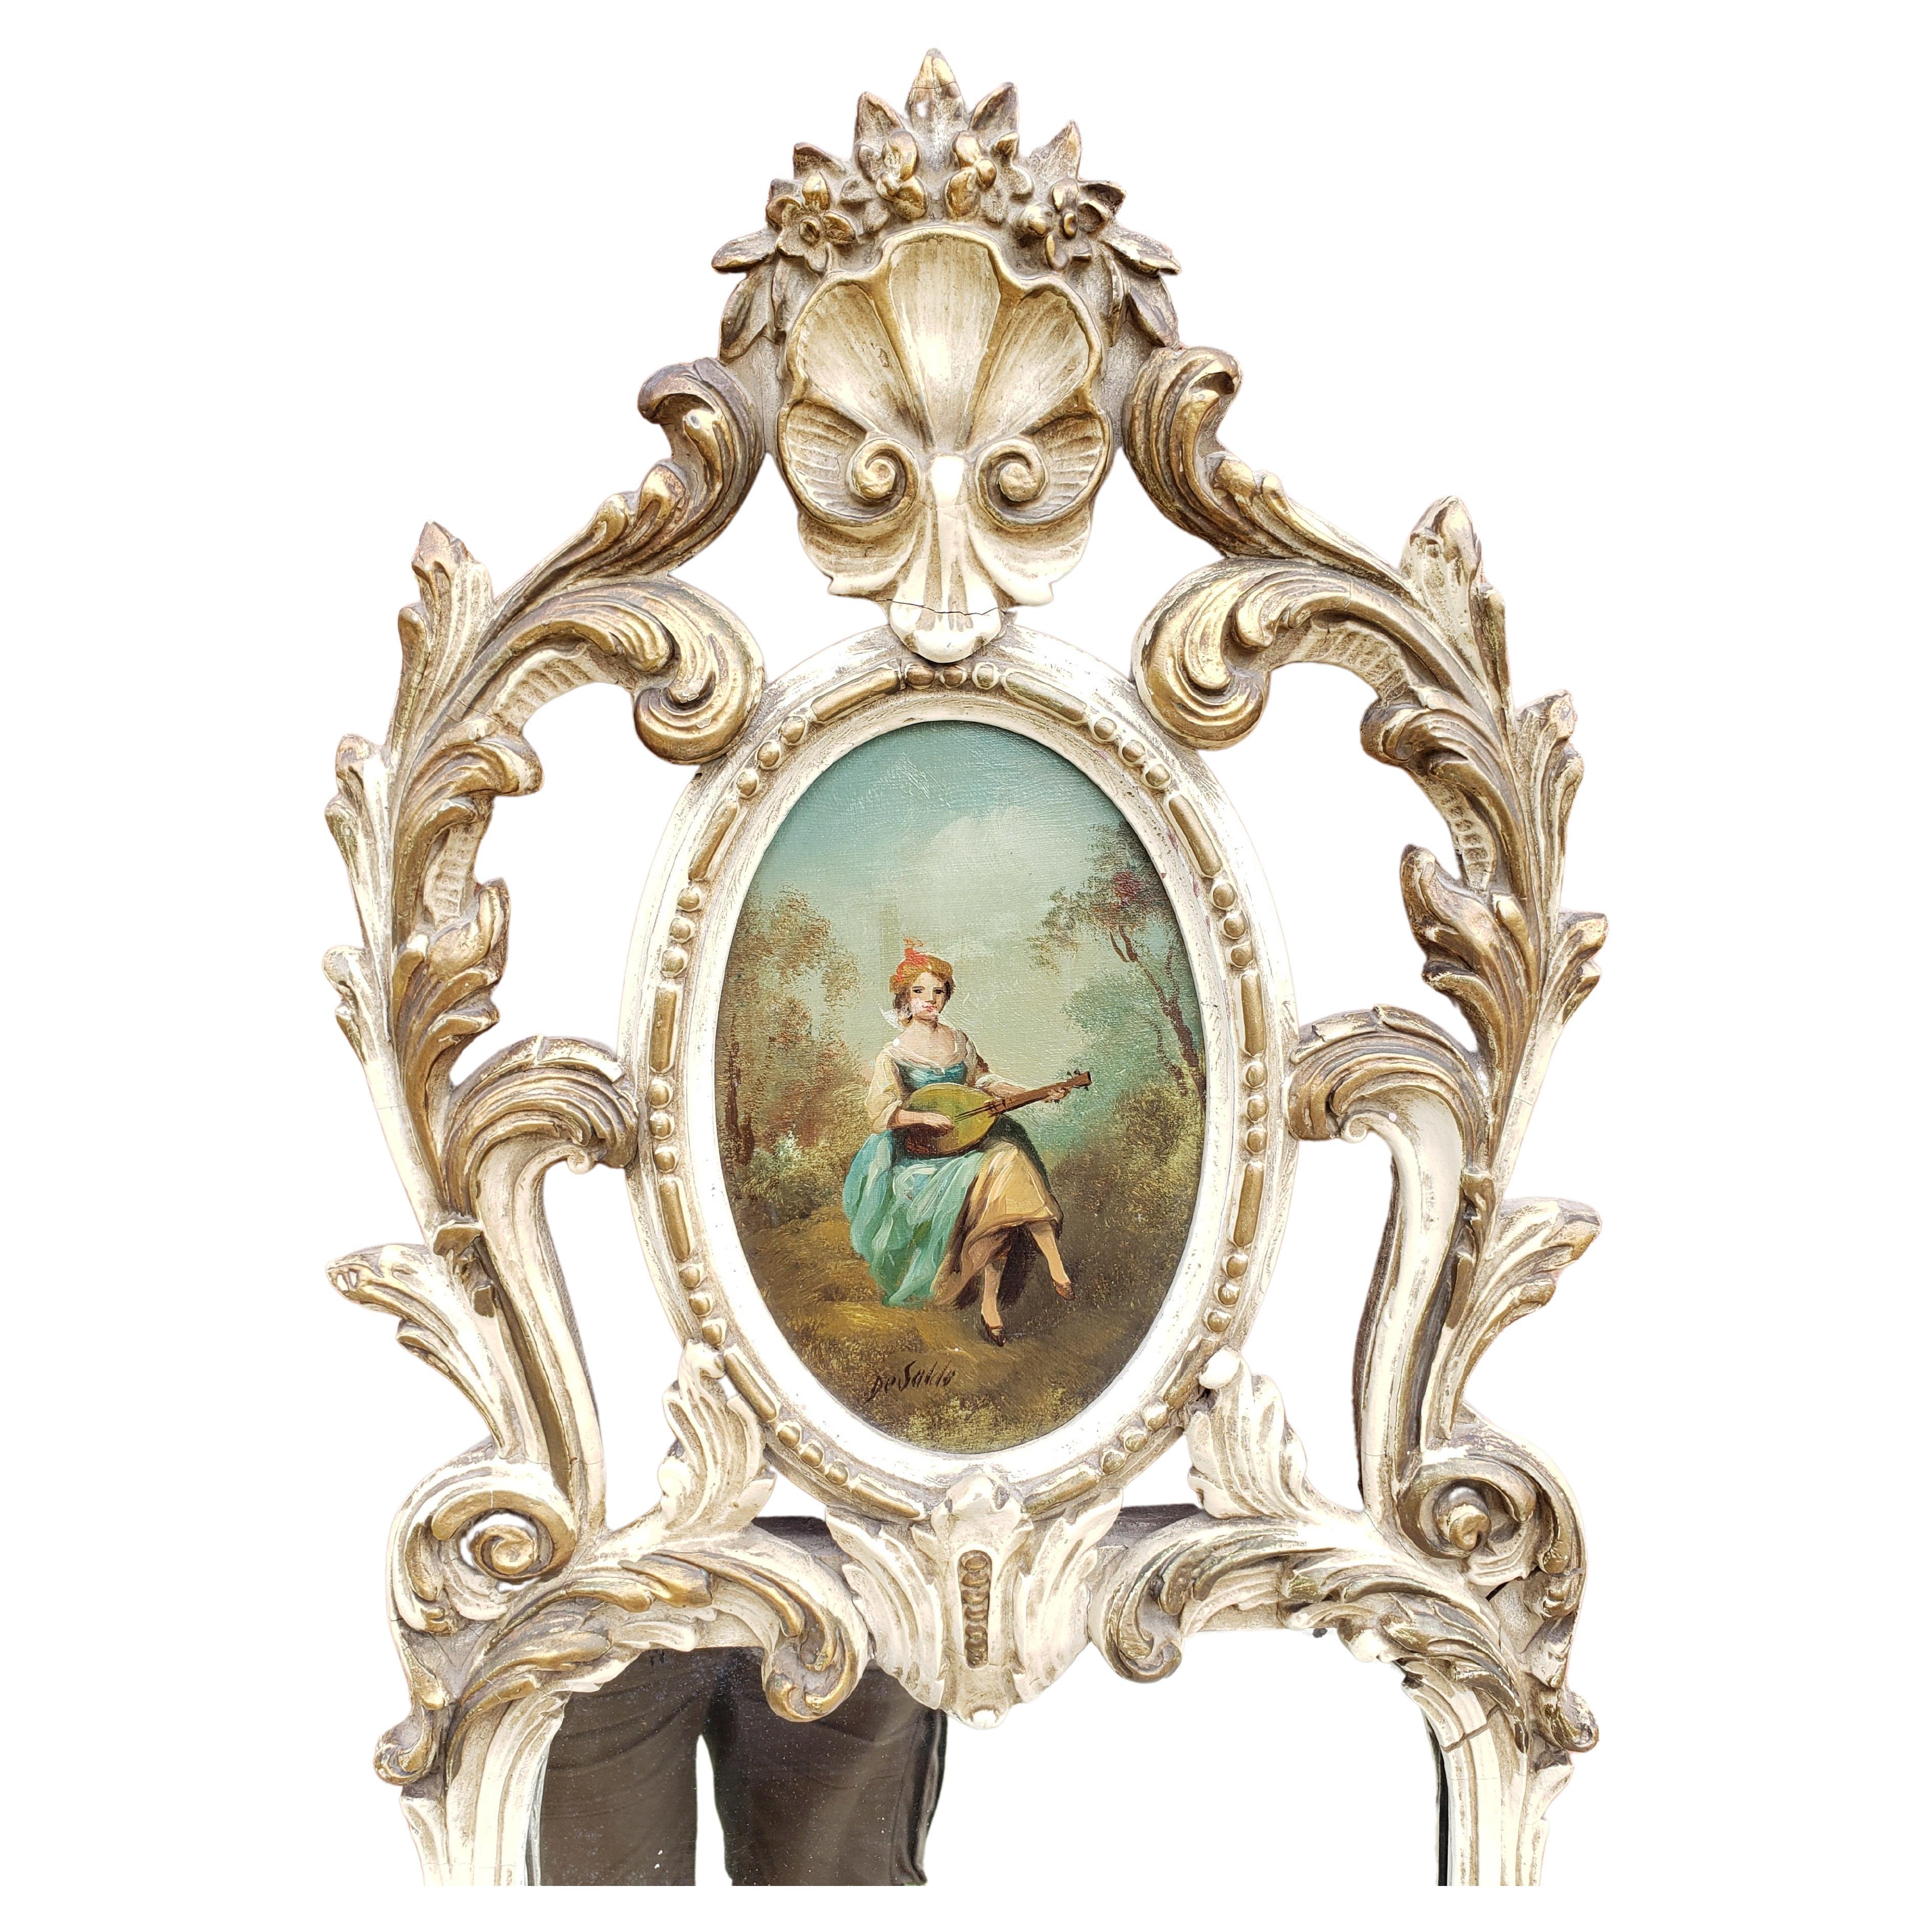 A 1930s impressive Louis XVI Style Enamel, Gilt Decorated and Hand Painted Trumeau mirror. 
Painting depicting a young lady playing a musical instrument. Signed Oil on canvas painting.